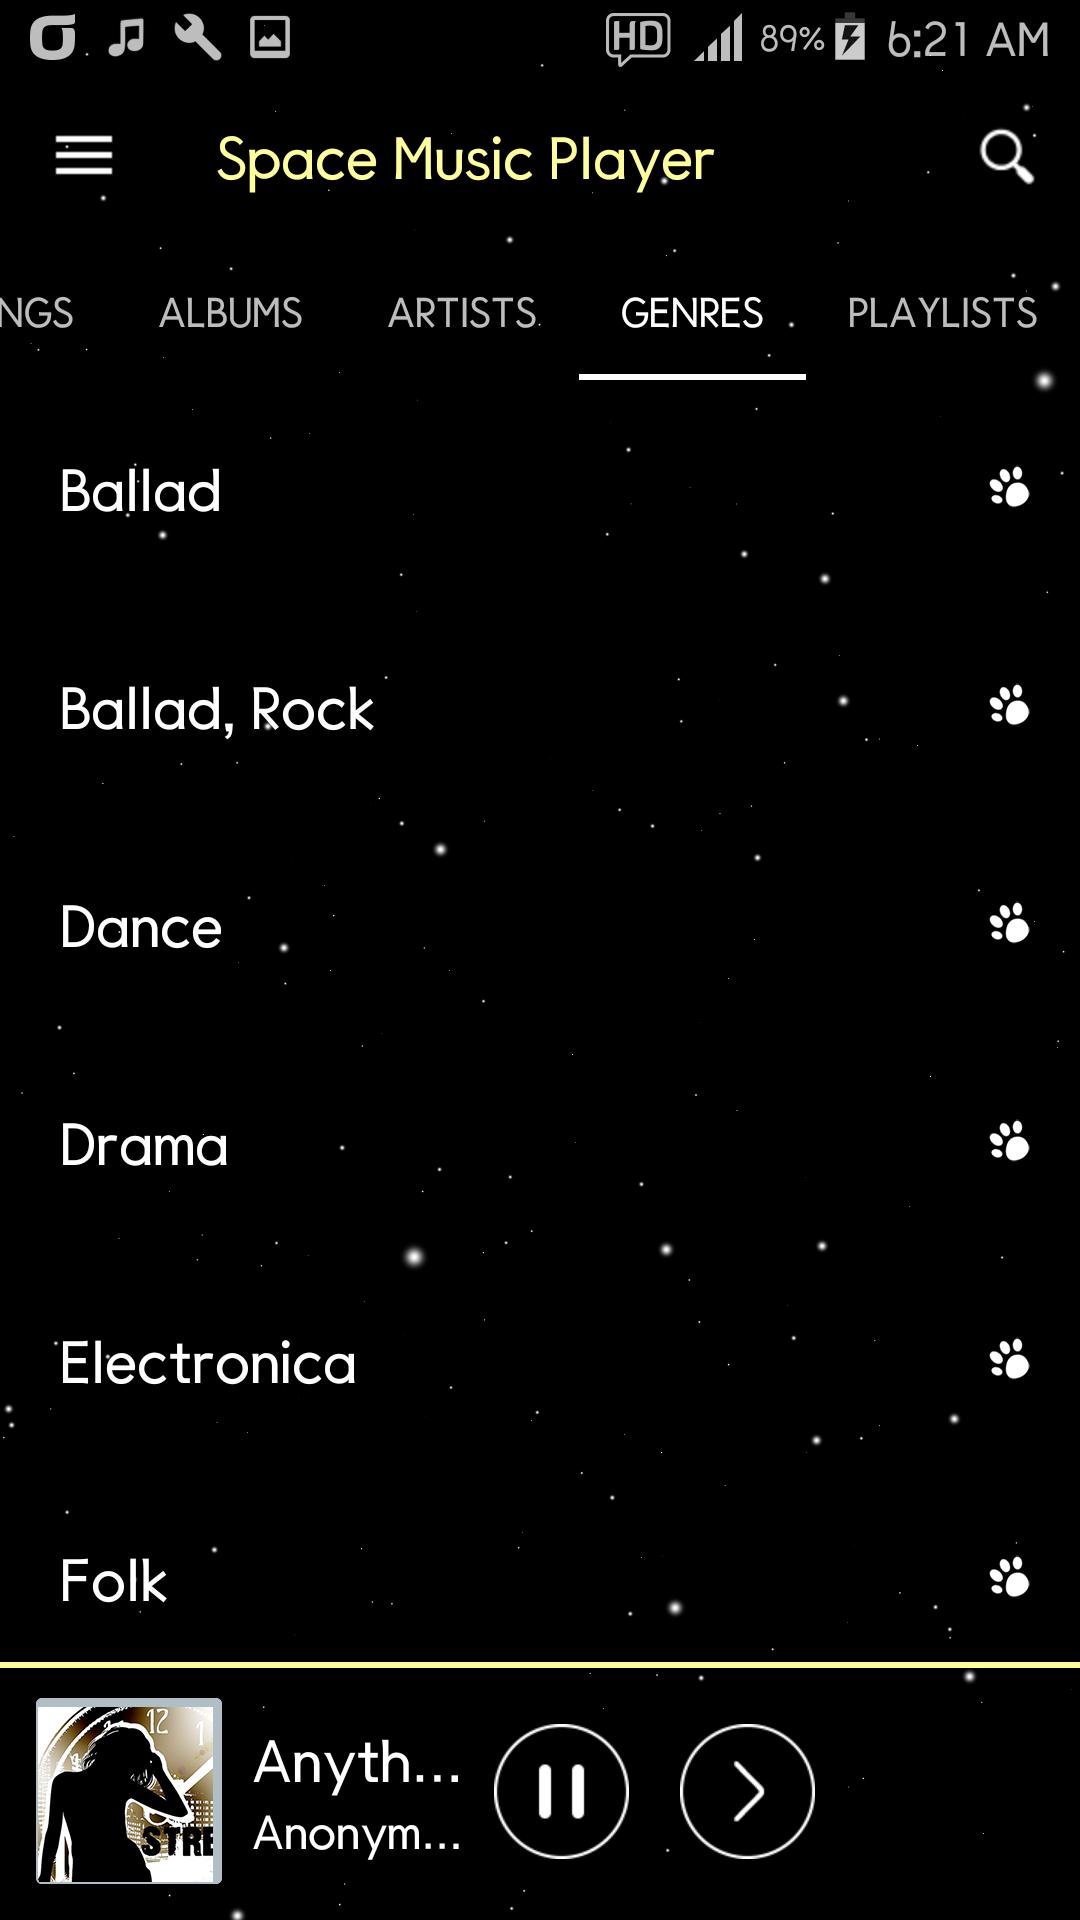 Space mp3 music player for Android - APK Download